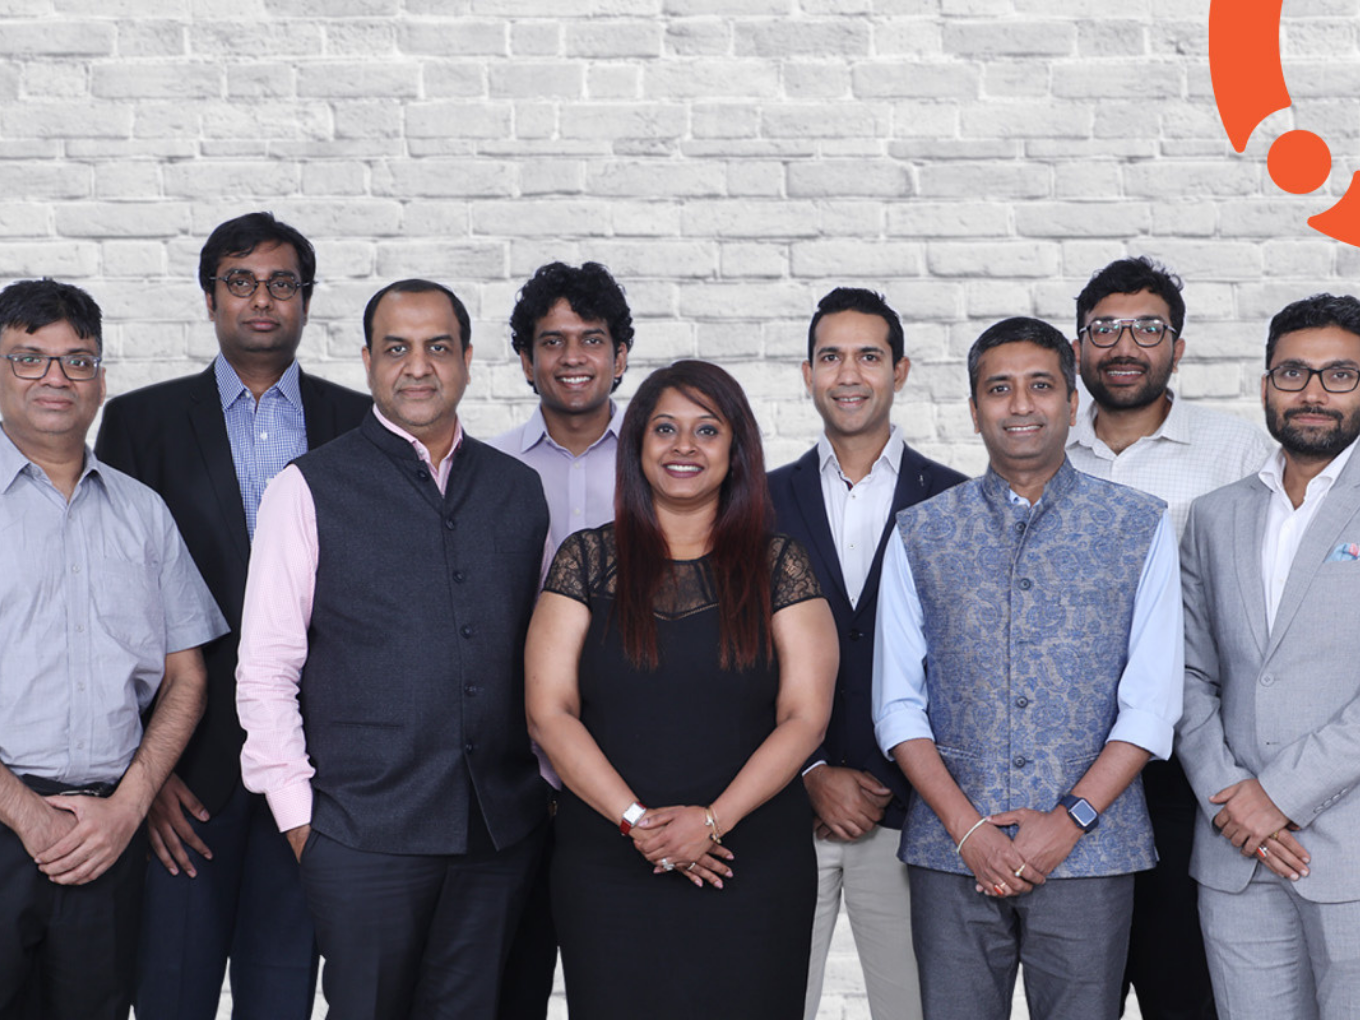 Home Interiors Ecommerce Marketplace YOUKRAFT Secures $10 Mn Funding For Pan India Expansion From Goel Family Office